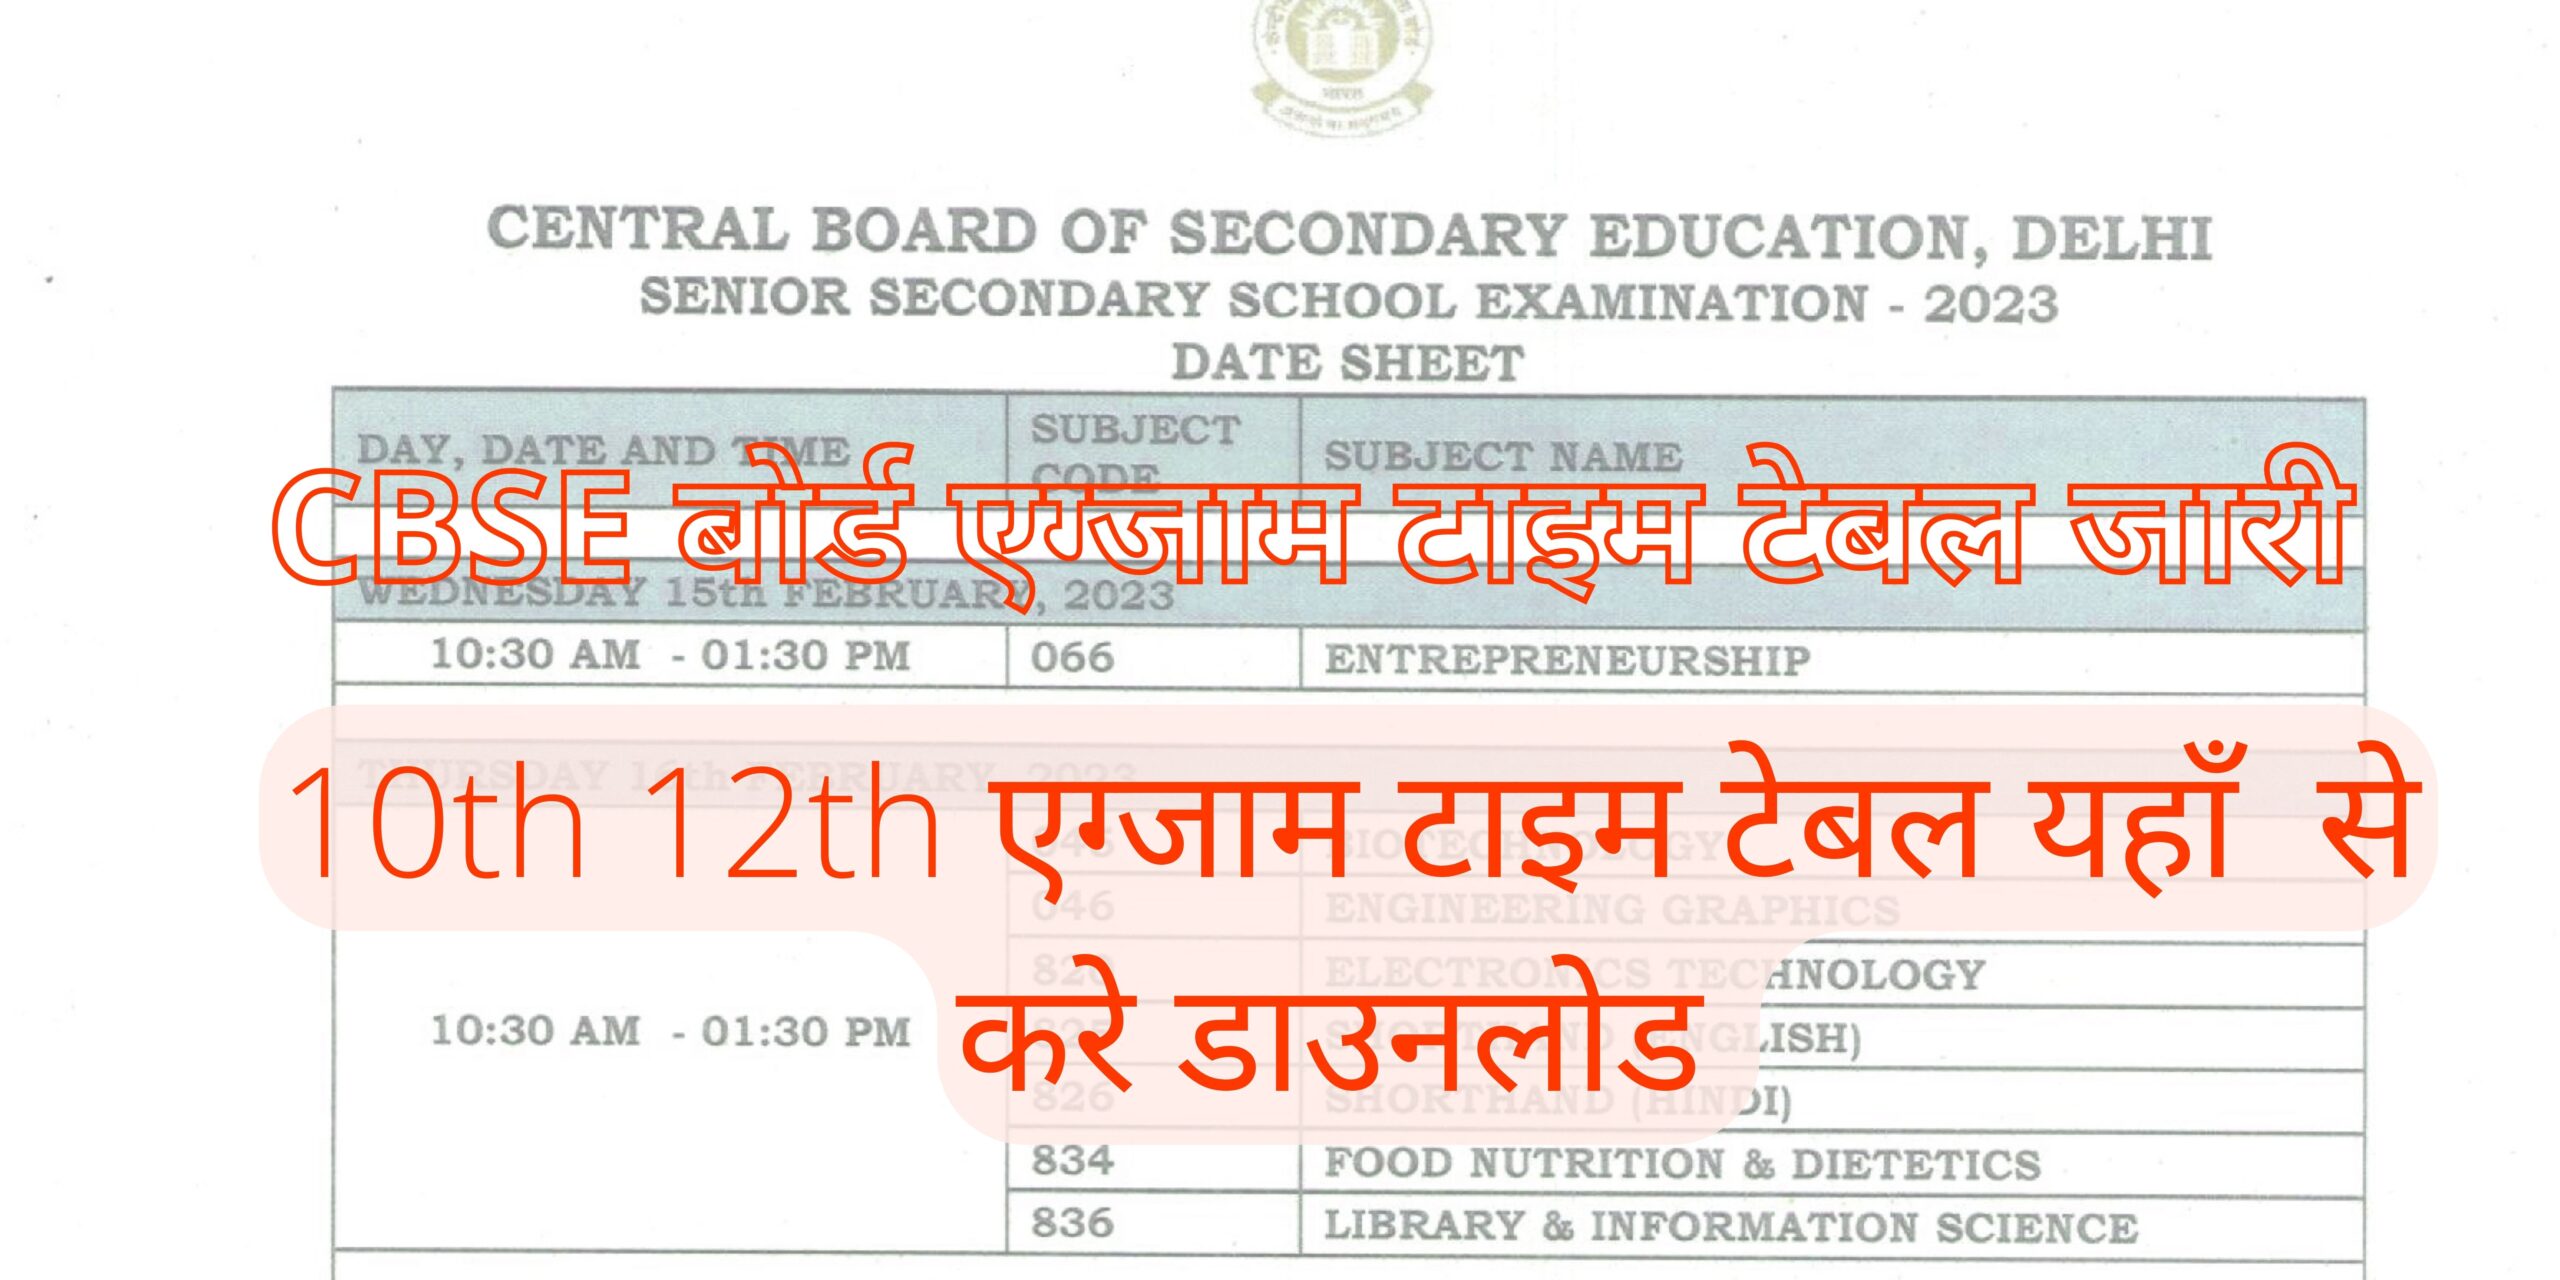 CBSE 10th 12th Exam Time Table 2023 1 scaled -